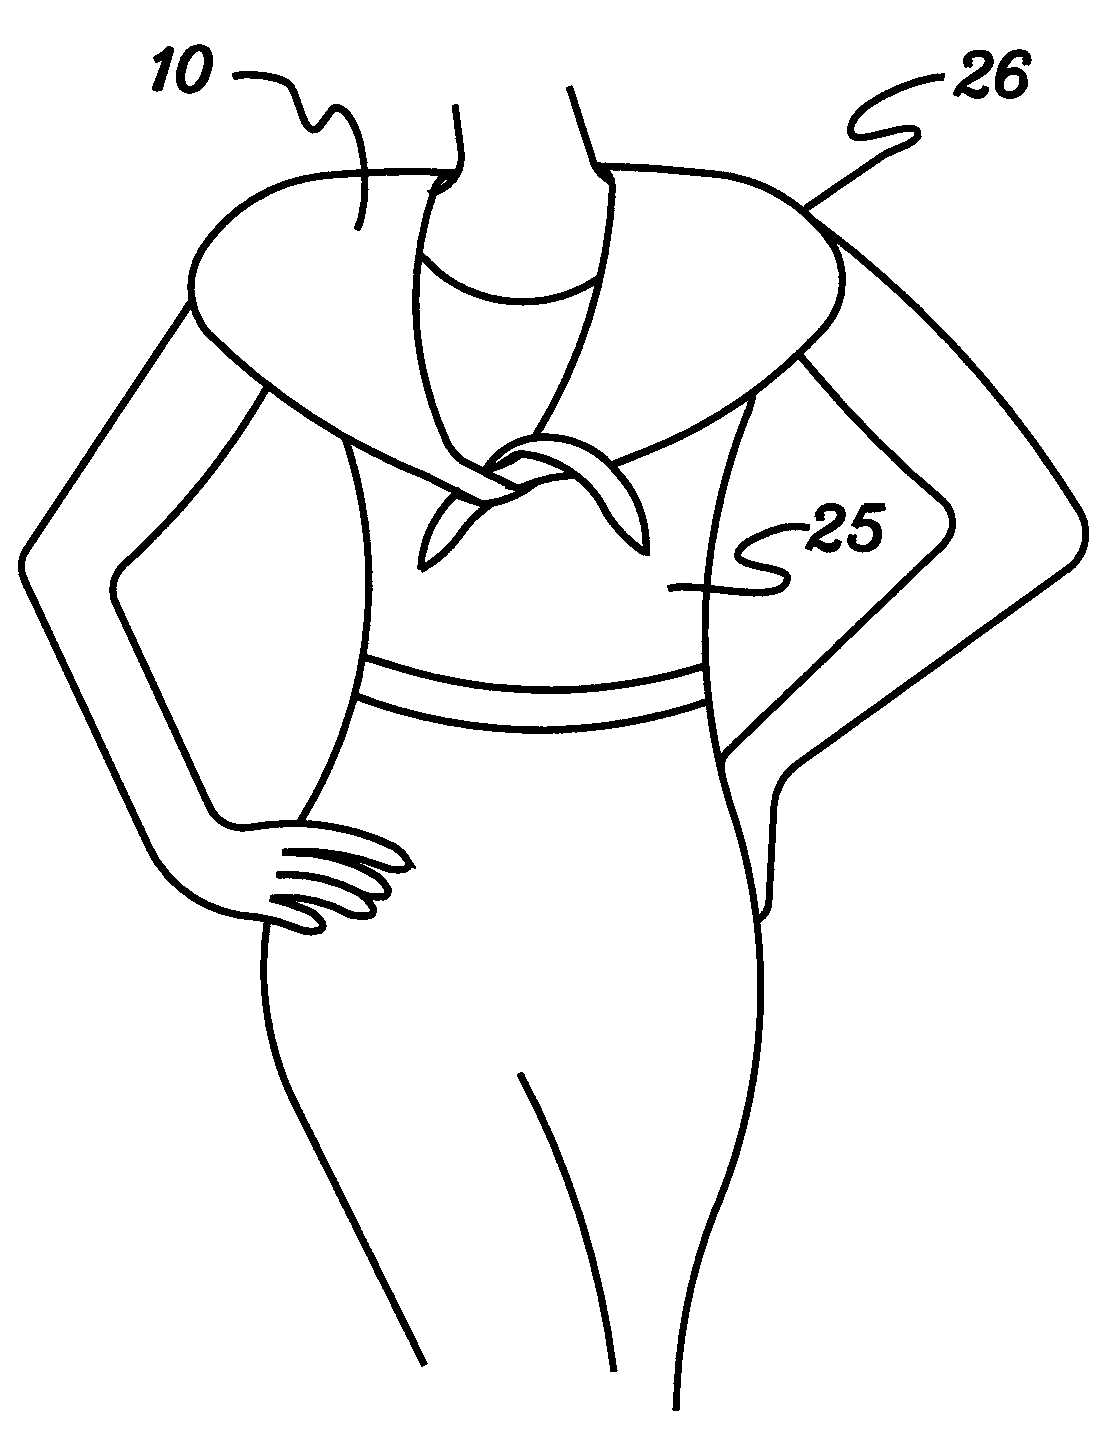 Wrap and cover-up device